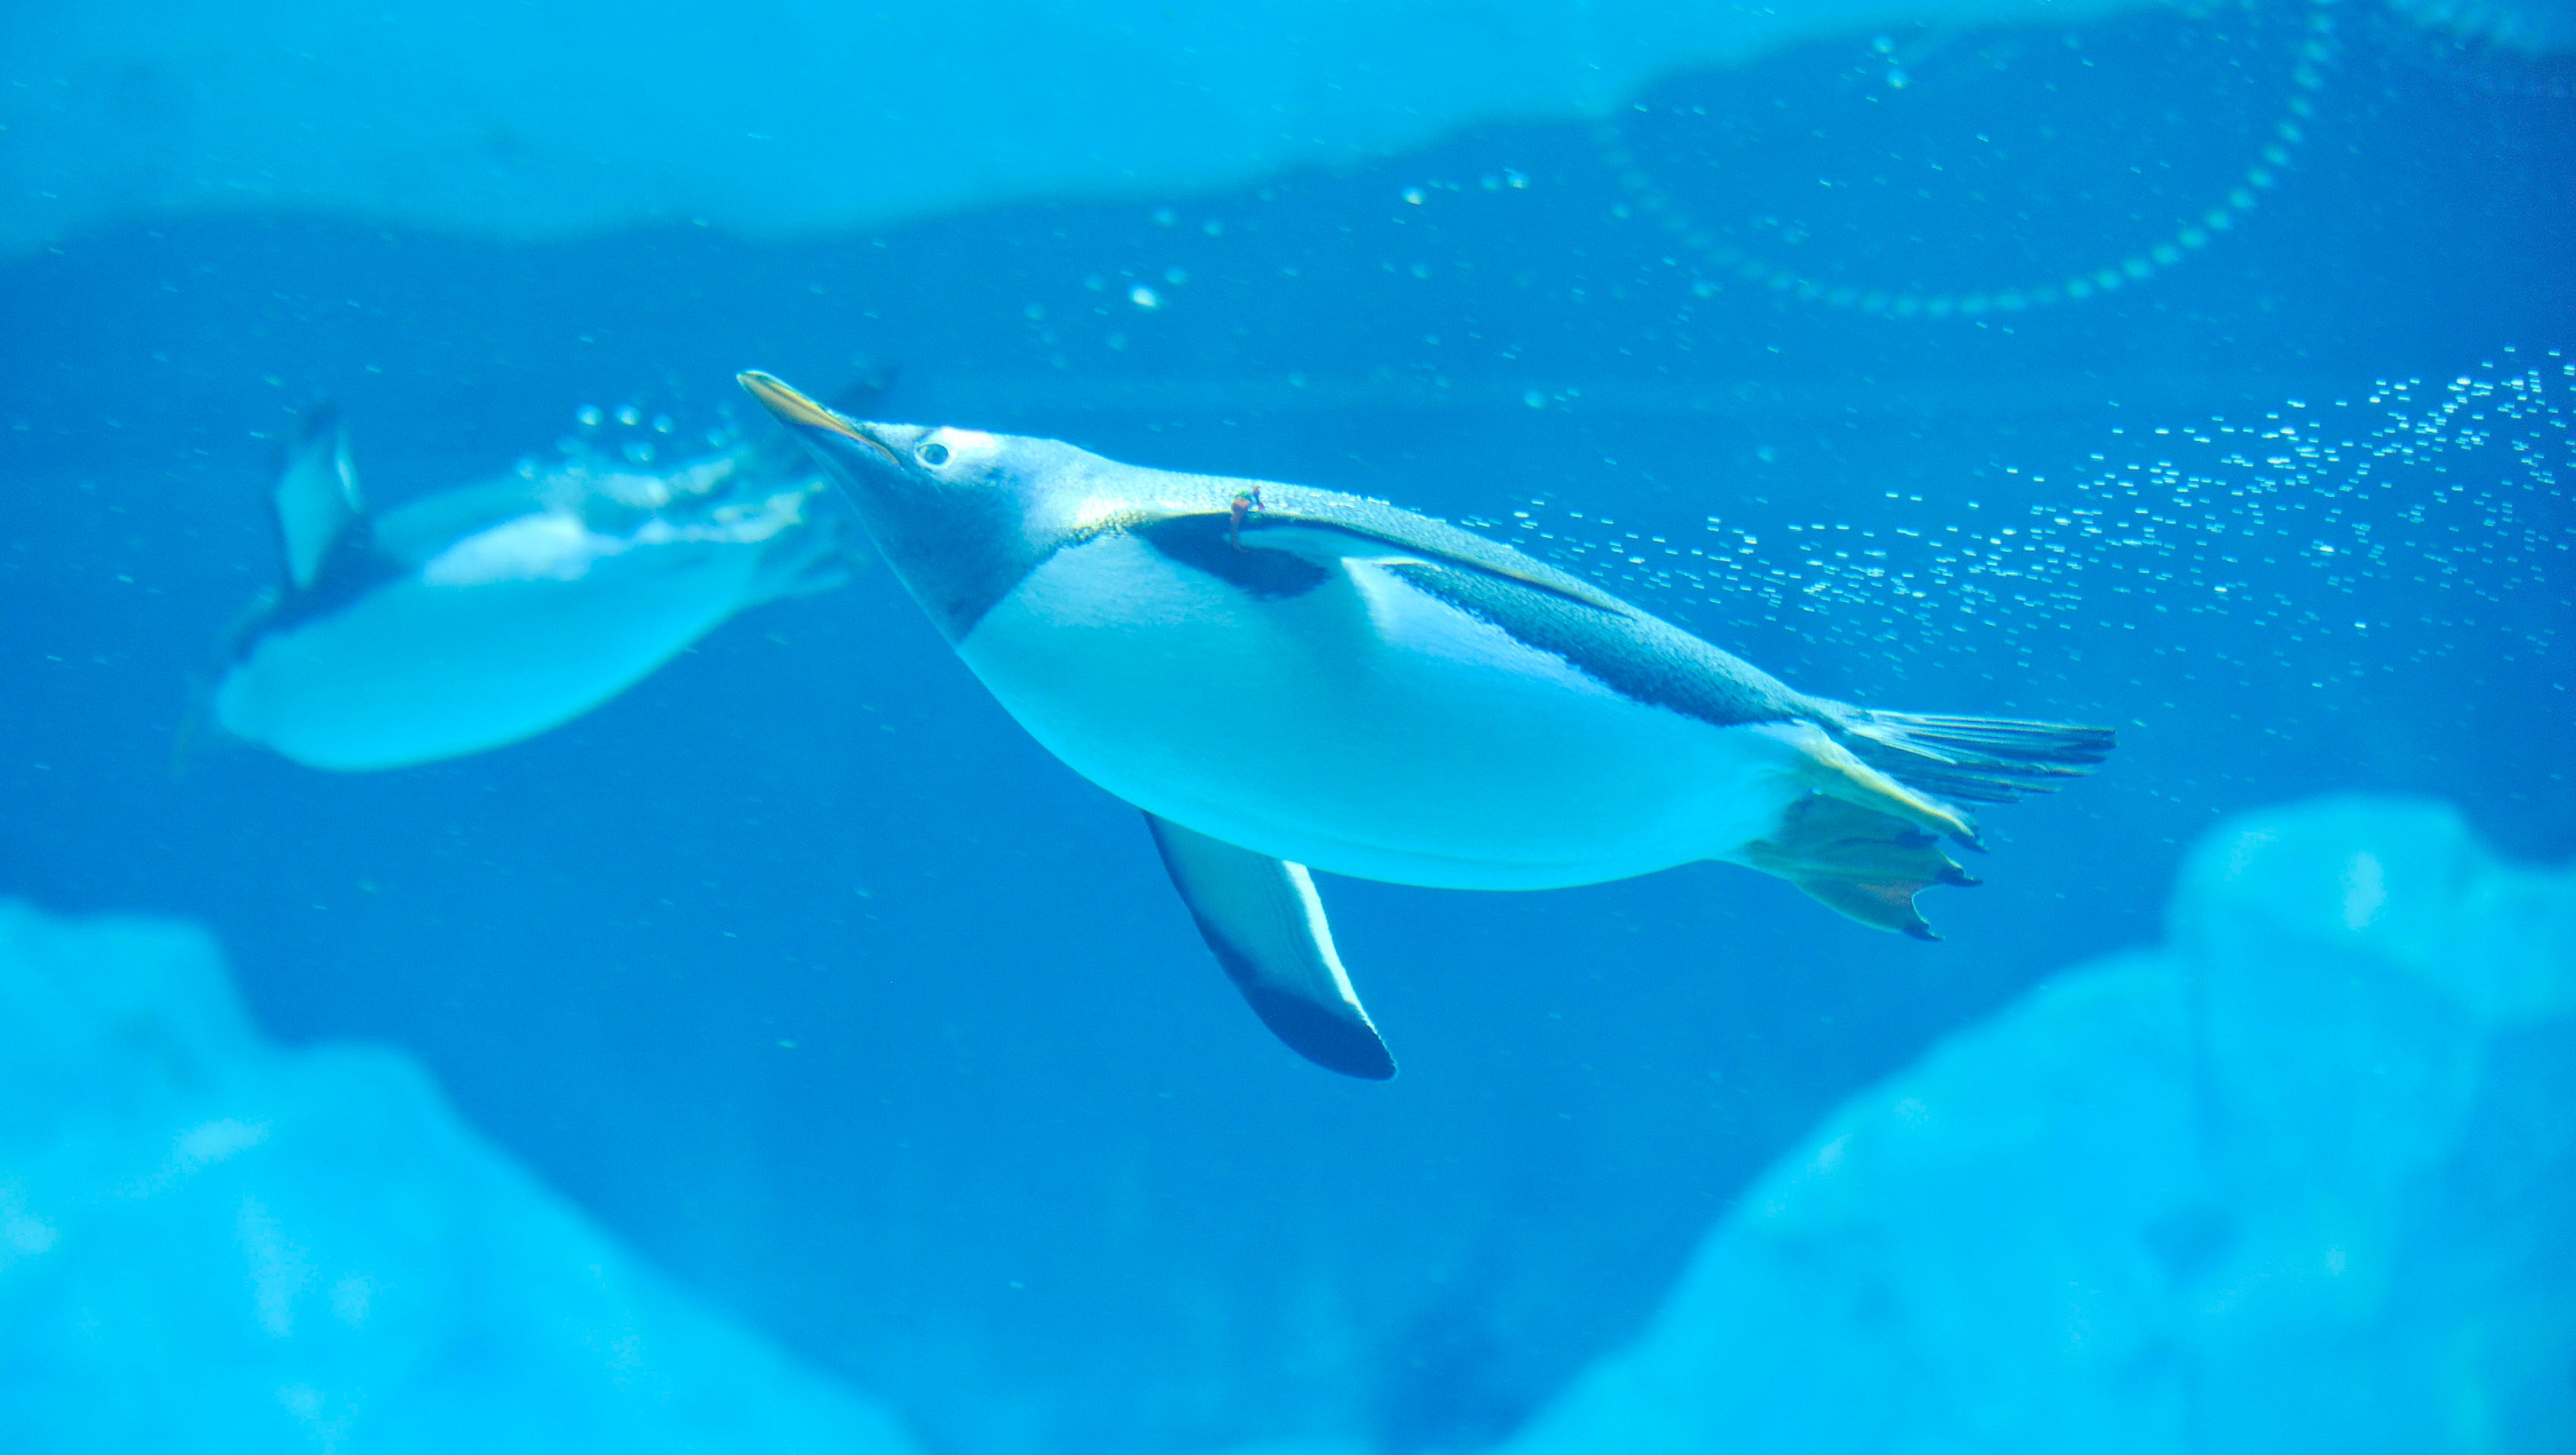 Penguins swim through the water at the Polk Penguin Conservation Center.